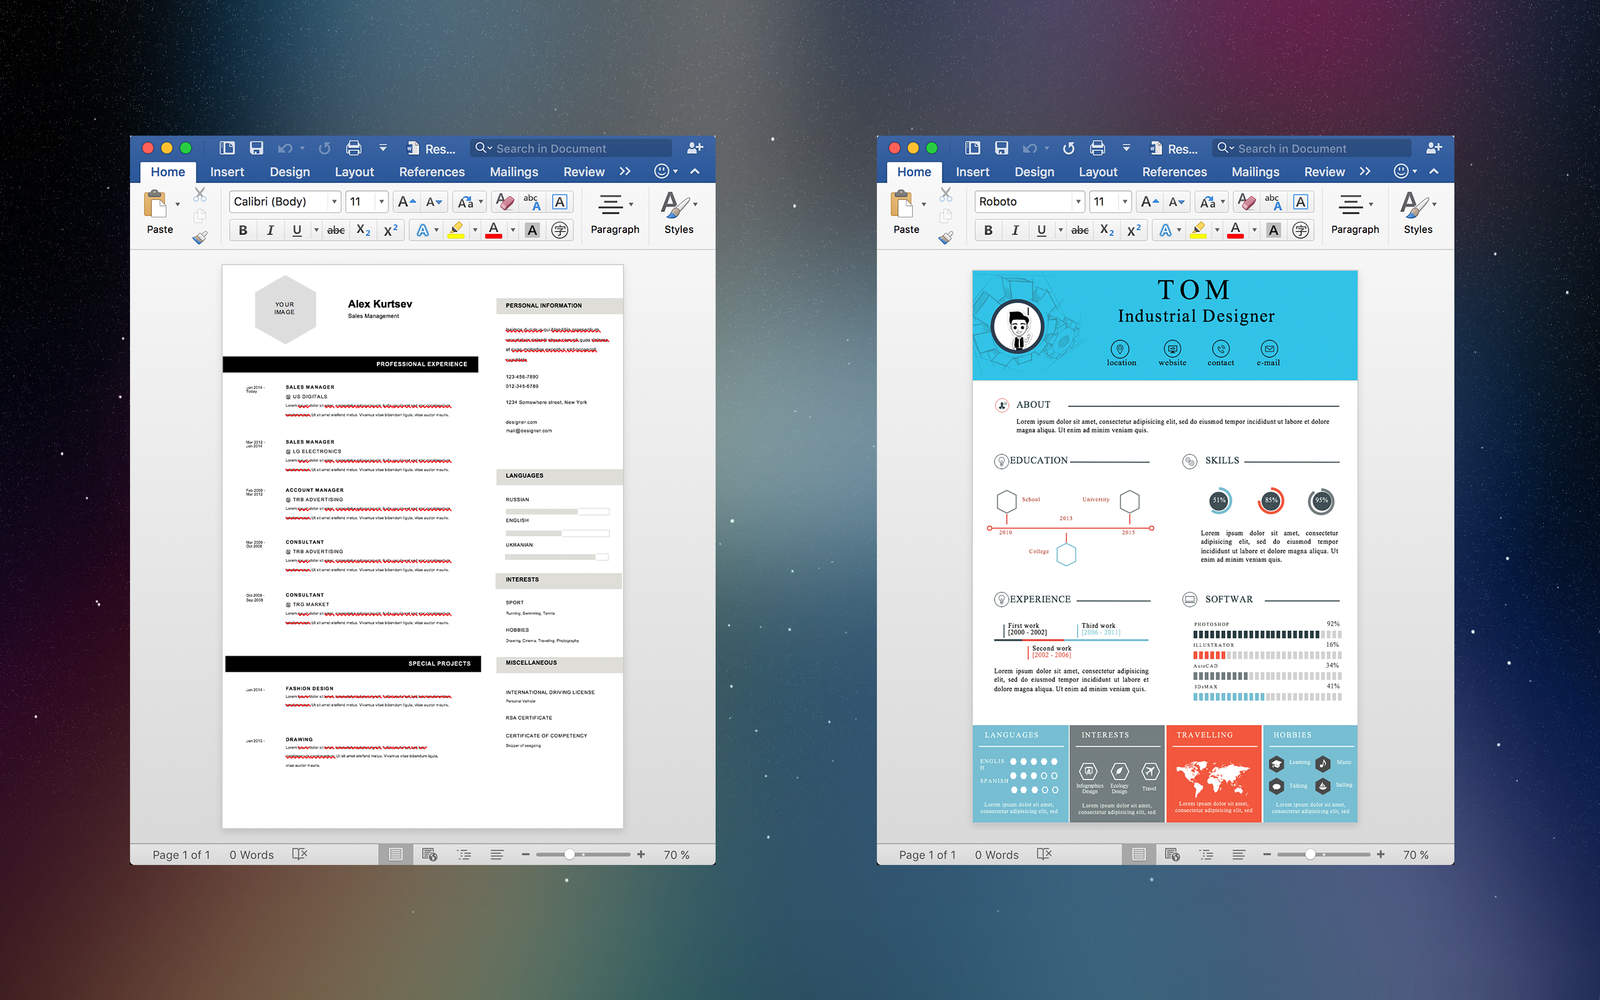 Resume Mate - Templates Design for Word 1.1 : Main Window